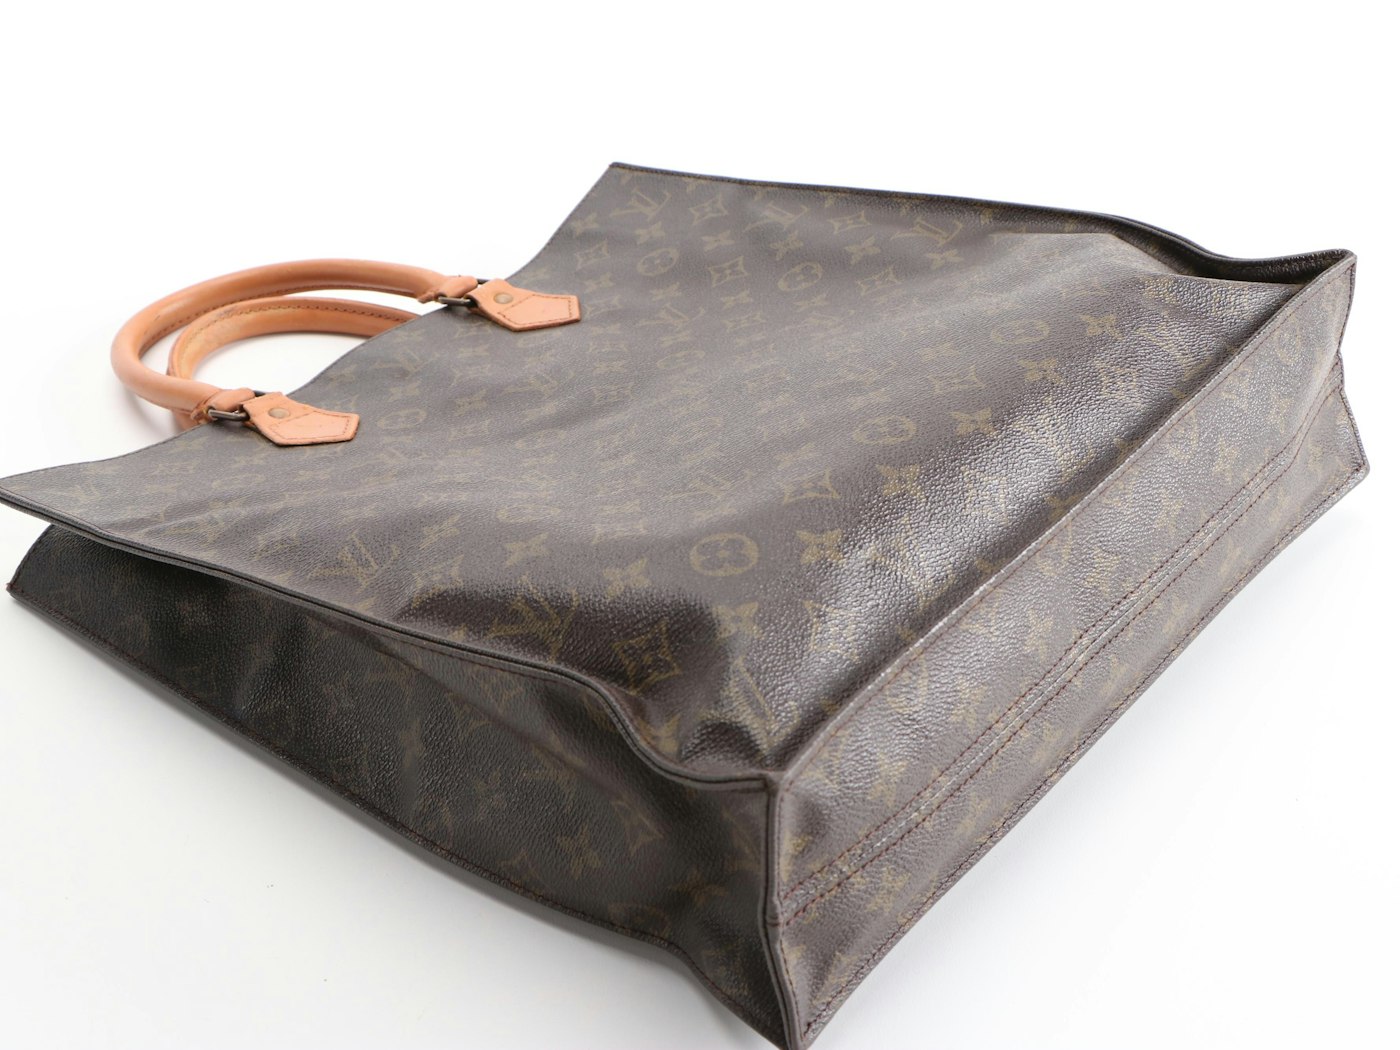 Refurbished Louis Vuitton Sac Plat in Monogram Canvas and Leather, 1988 Vintage | EBTH